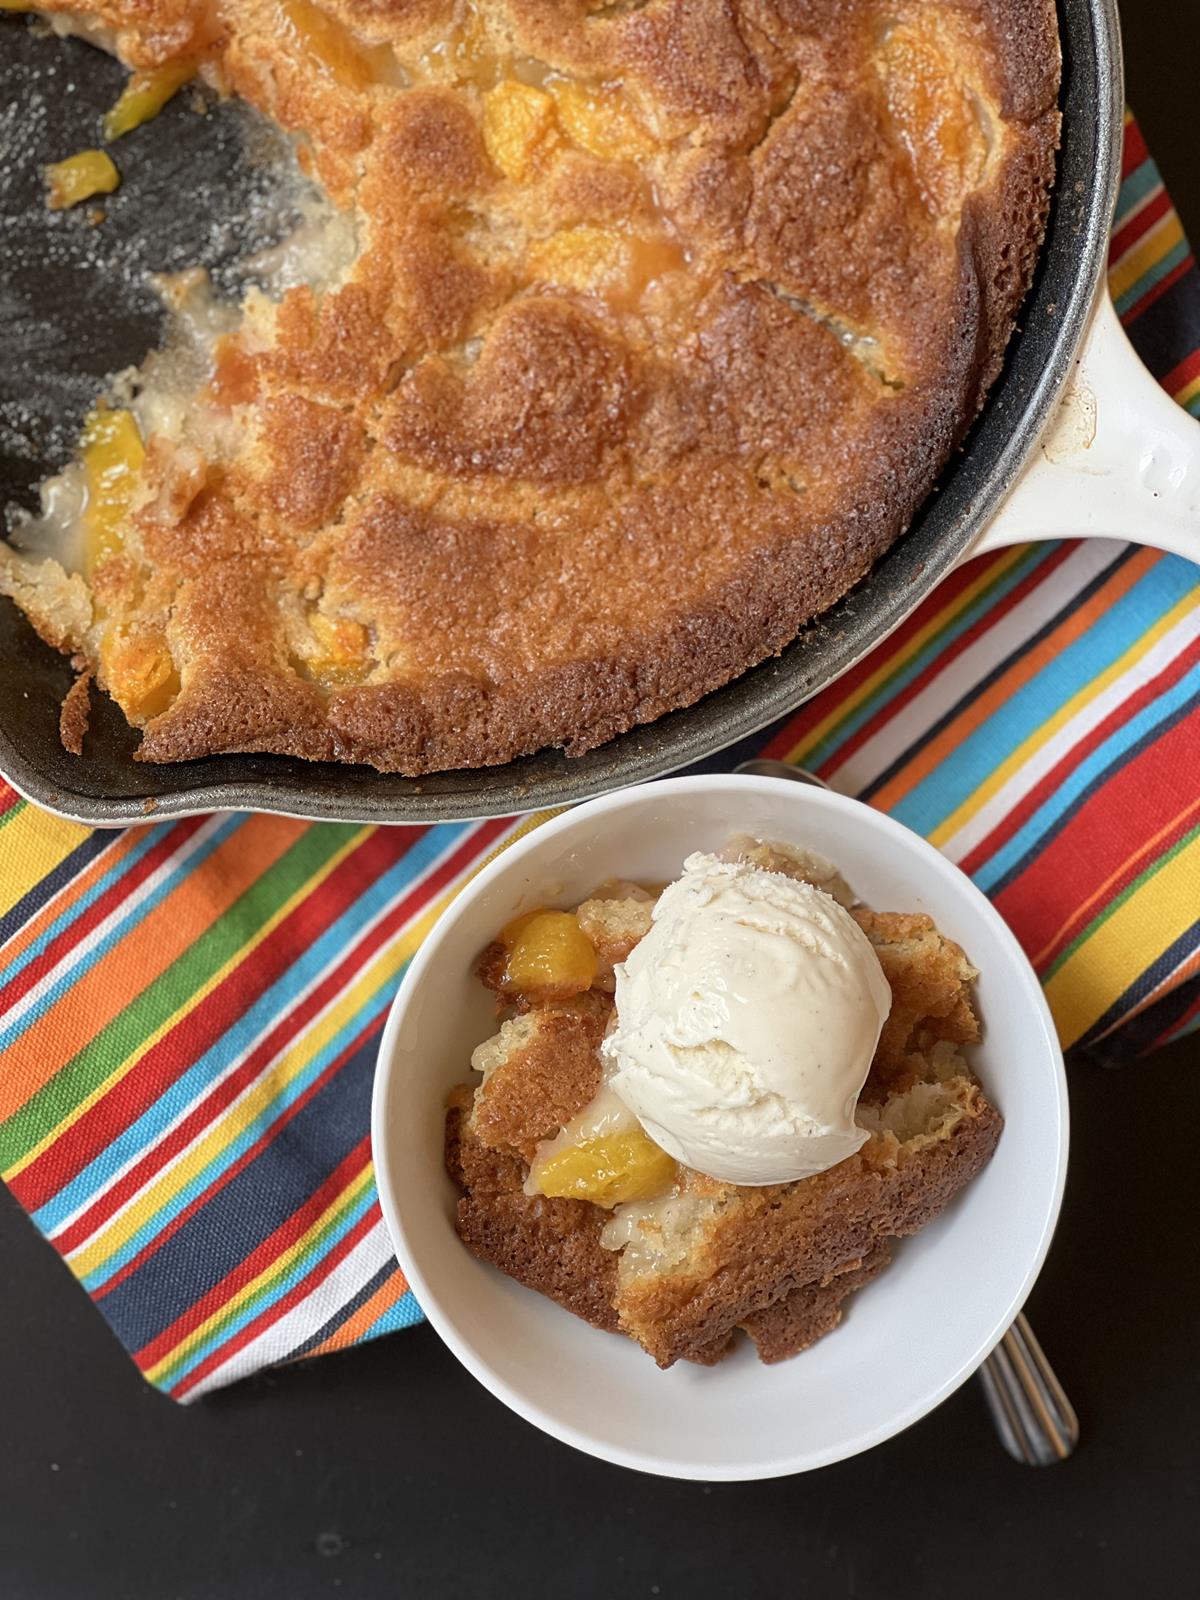 peach buckle in white bowl on striped napkin with pan of cobbler in background